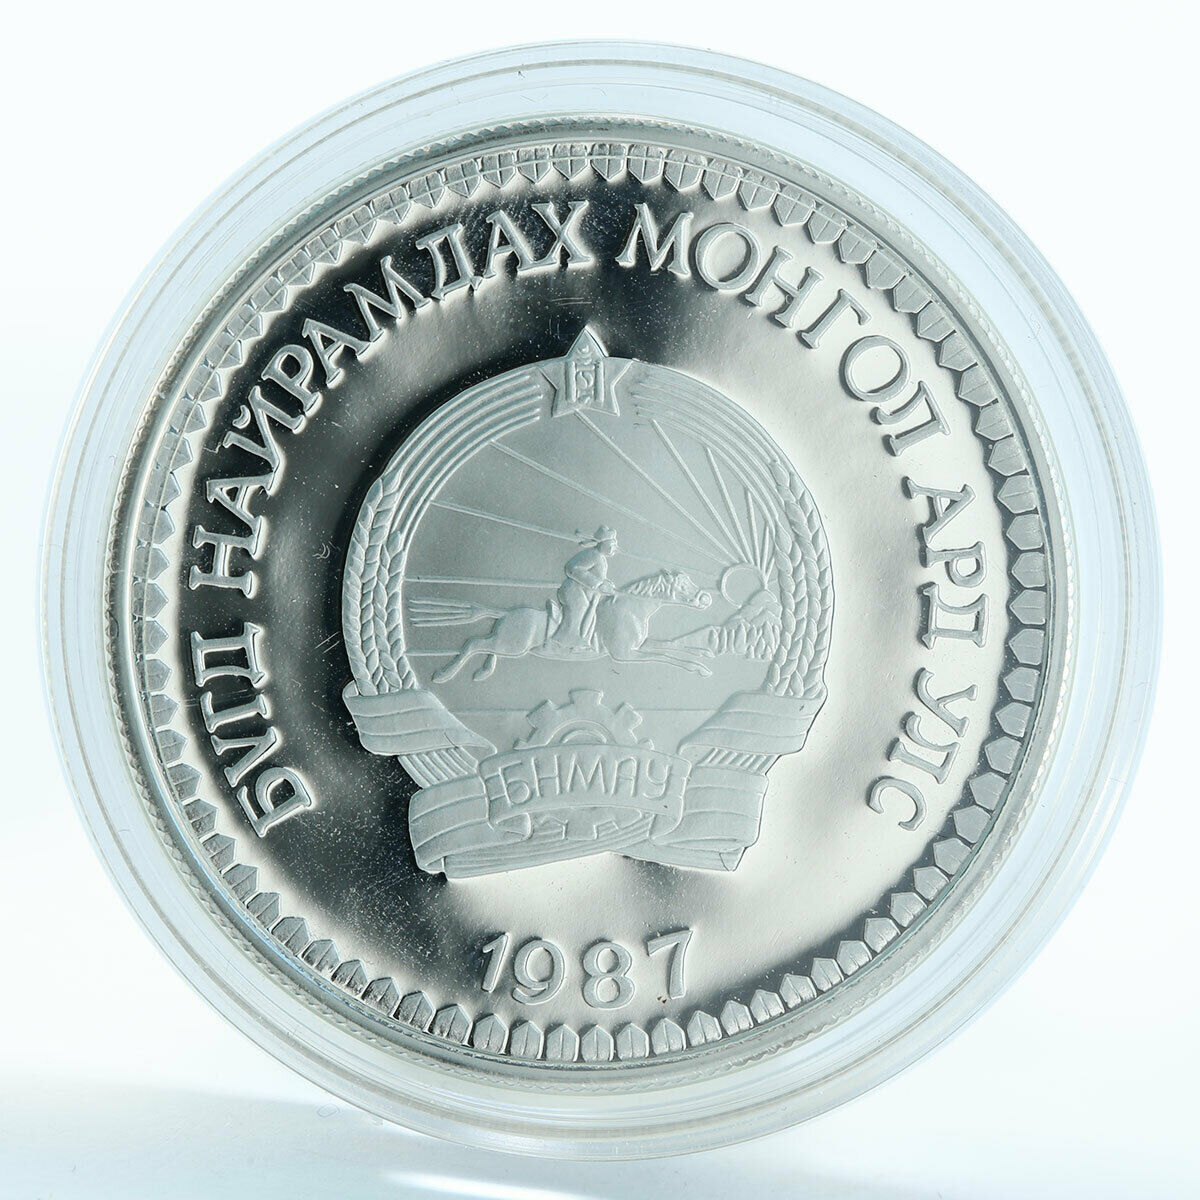 Mongolia 25 togrog Snow Leopard proof silver coin 1987